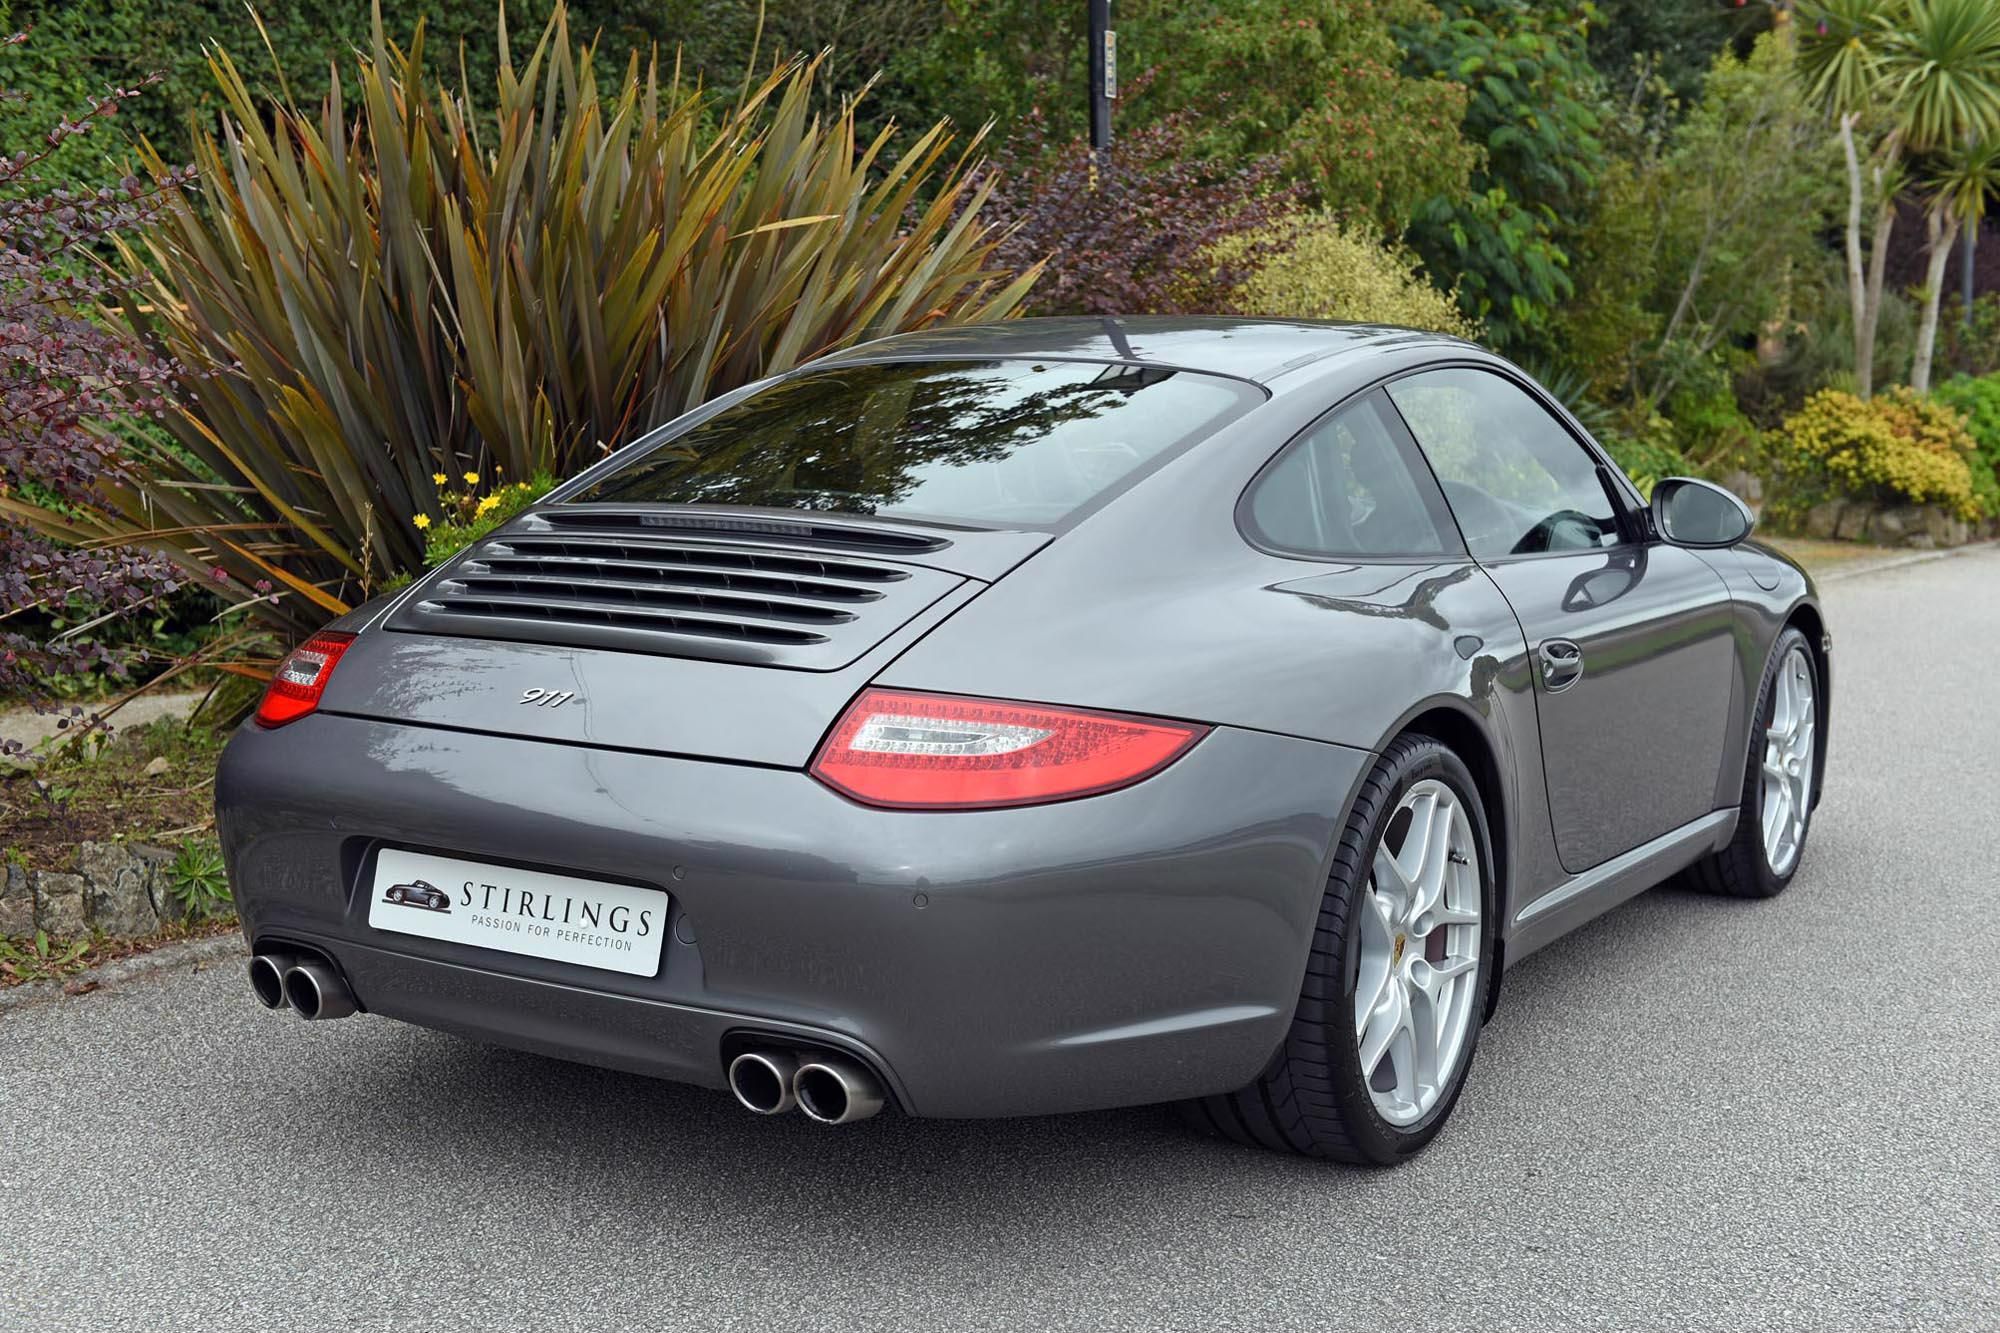 2010 Porsche 911 997 Carrera S PDK Coupe for sale - Stirlings